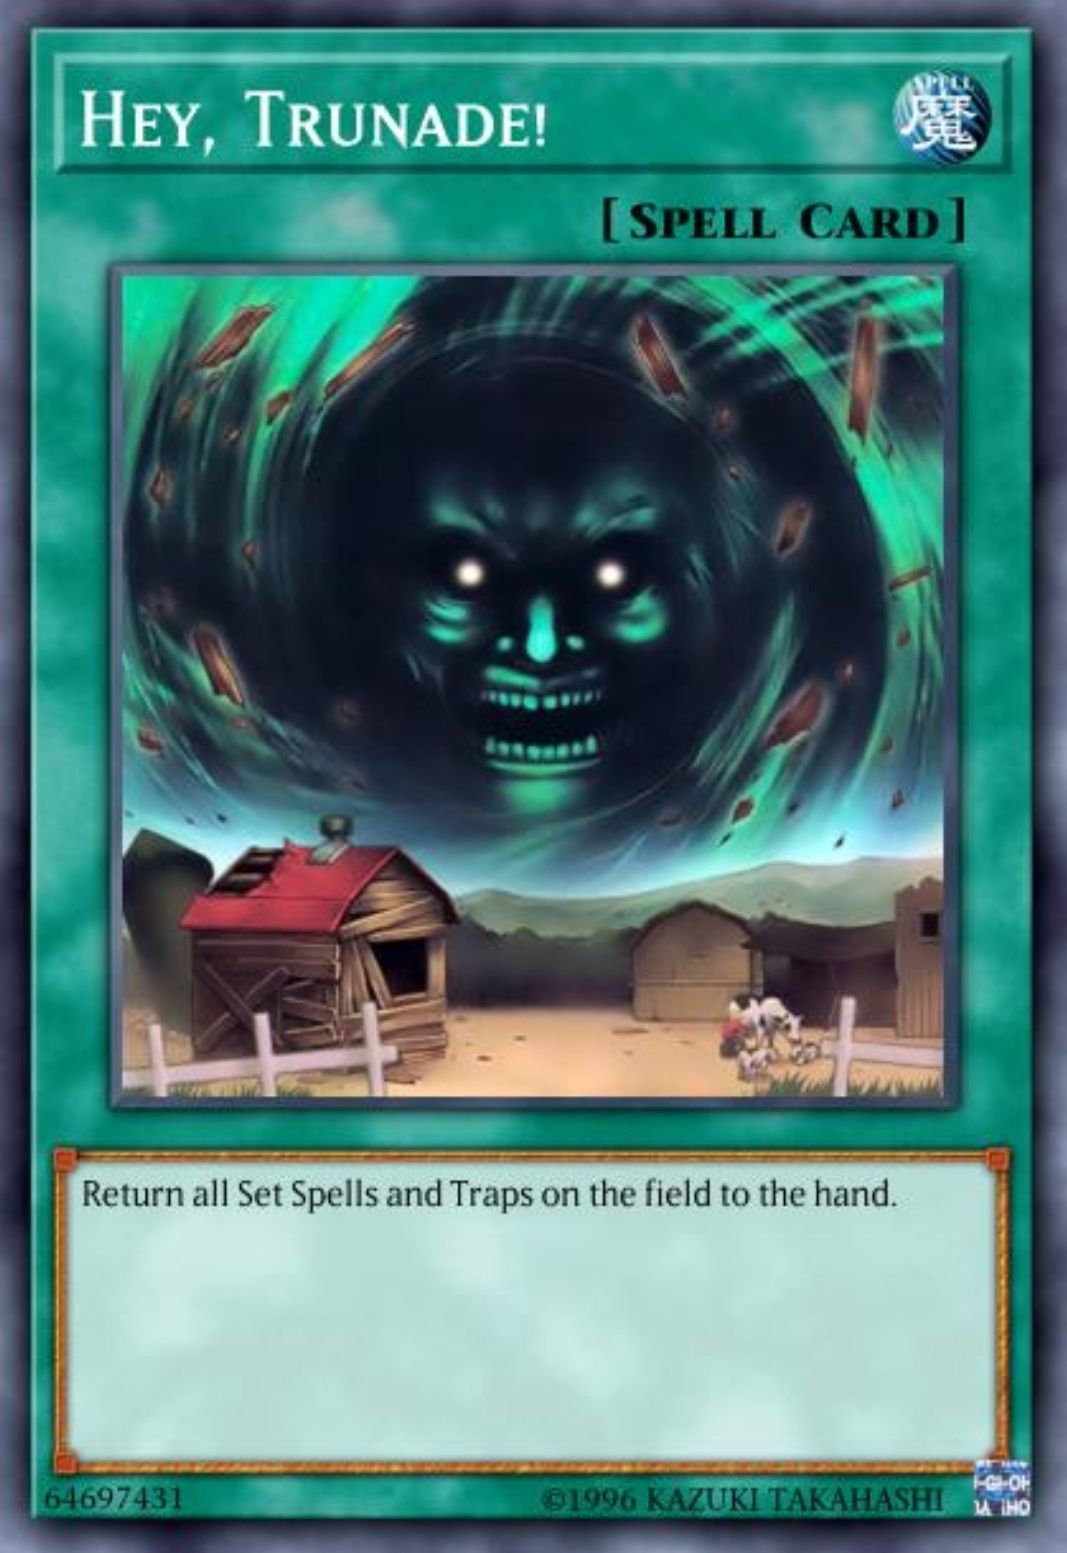 The Hey, Trunade! Magic card from YuGiOh! Duel Links